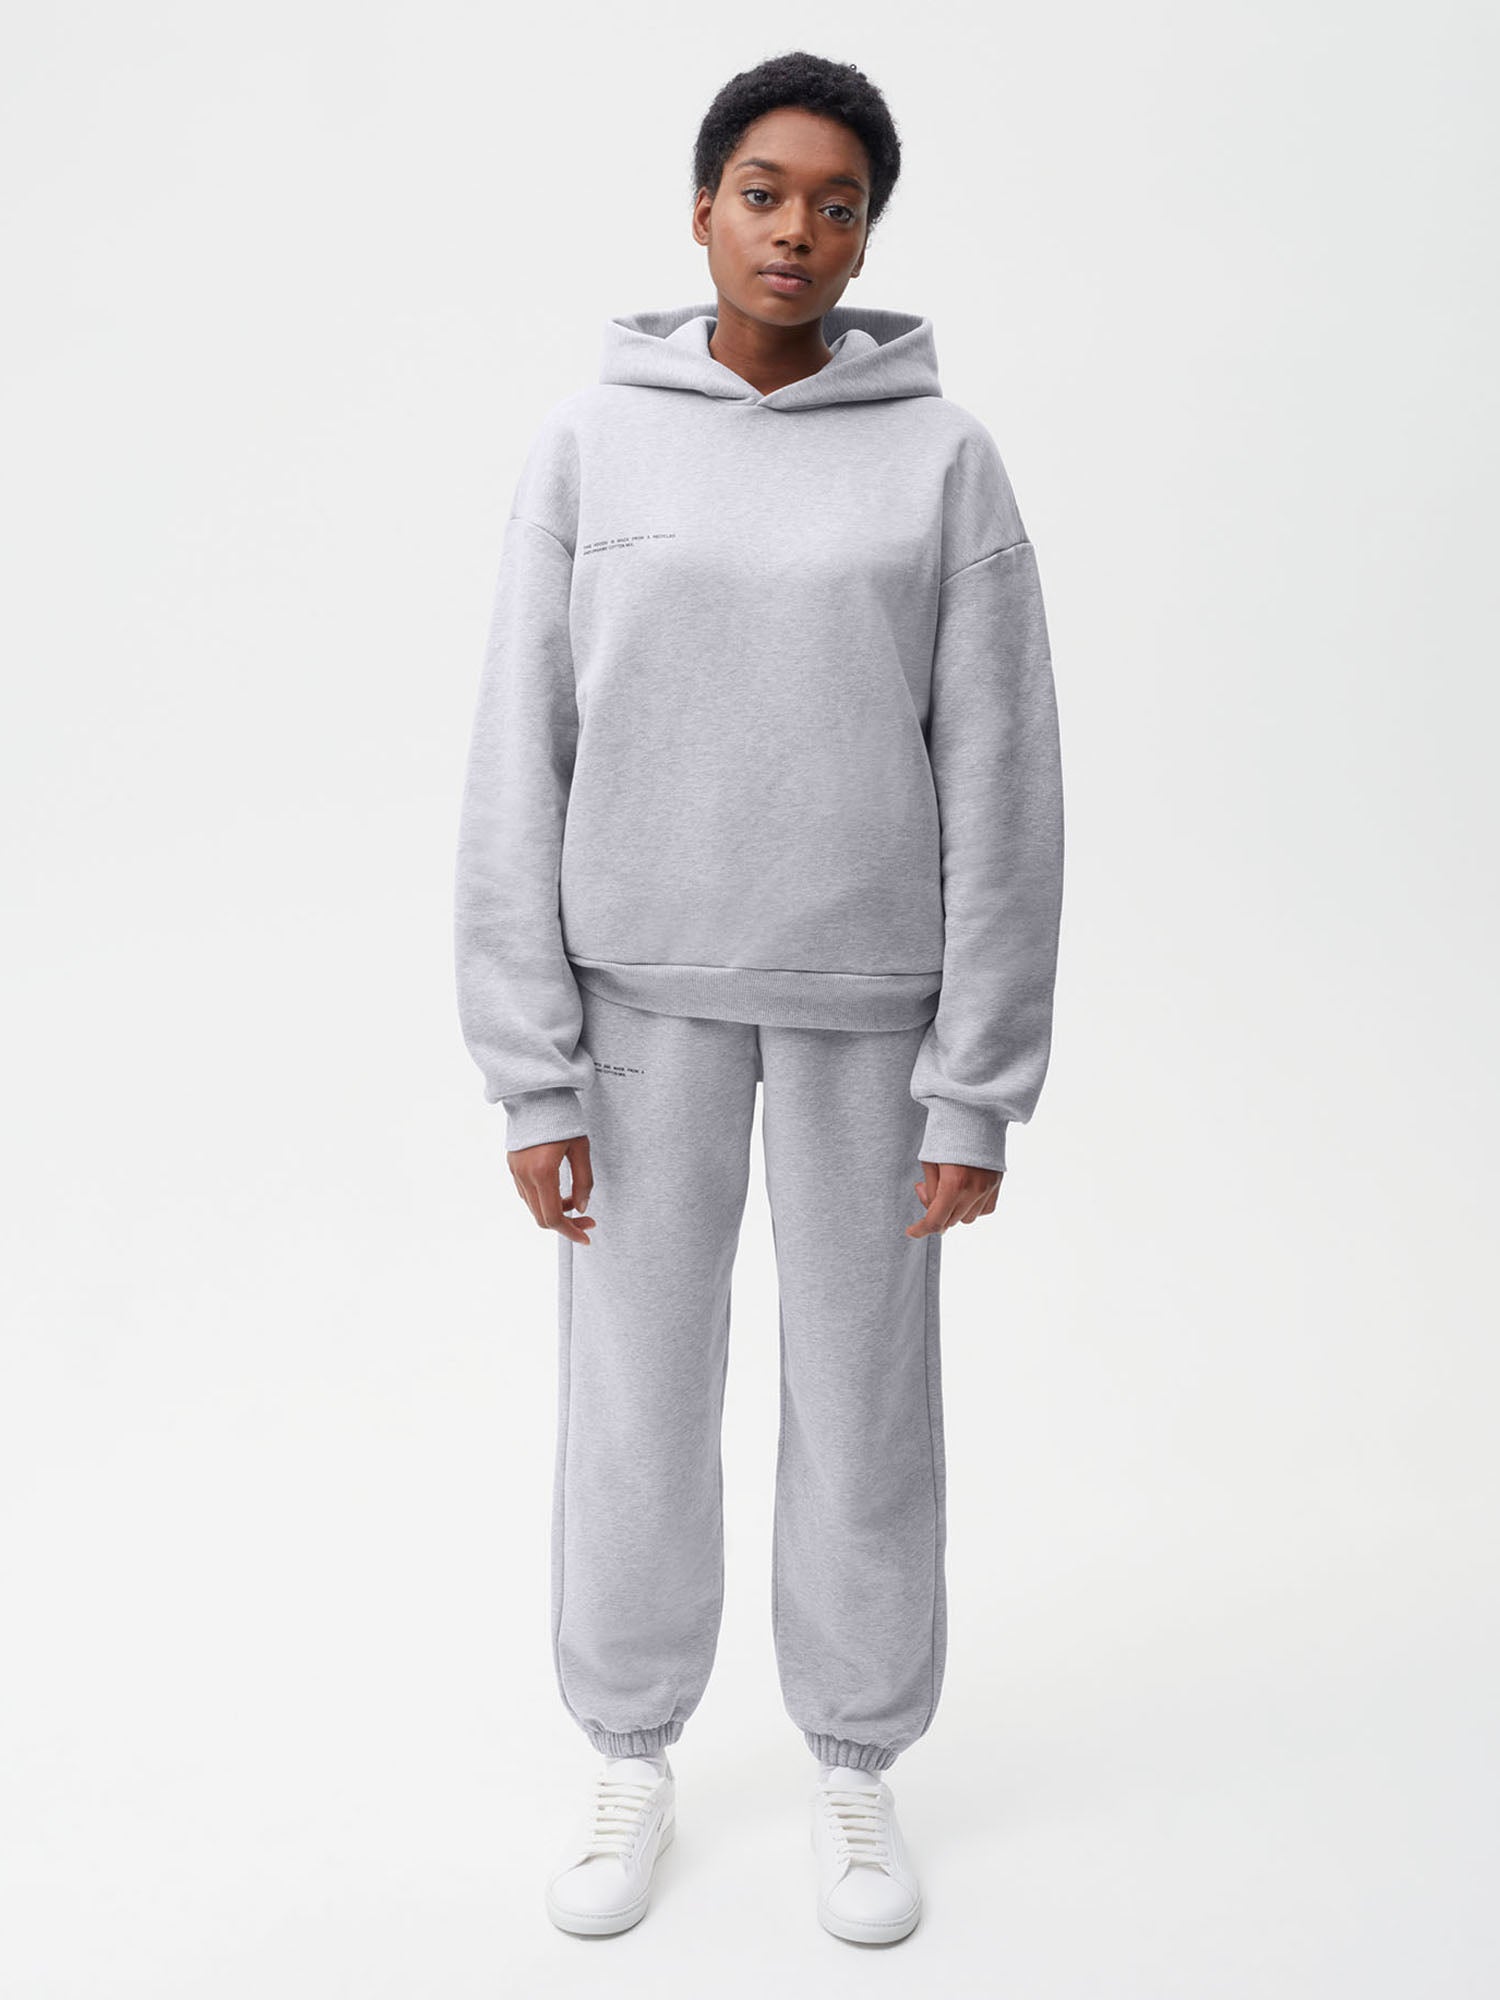 Heavyweight Recycled Cotton Track Pants Grey Marl Female Model-female-2